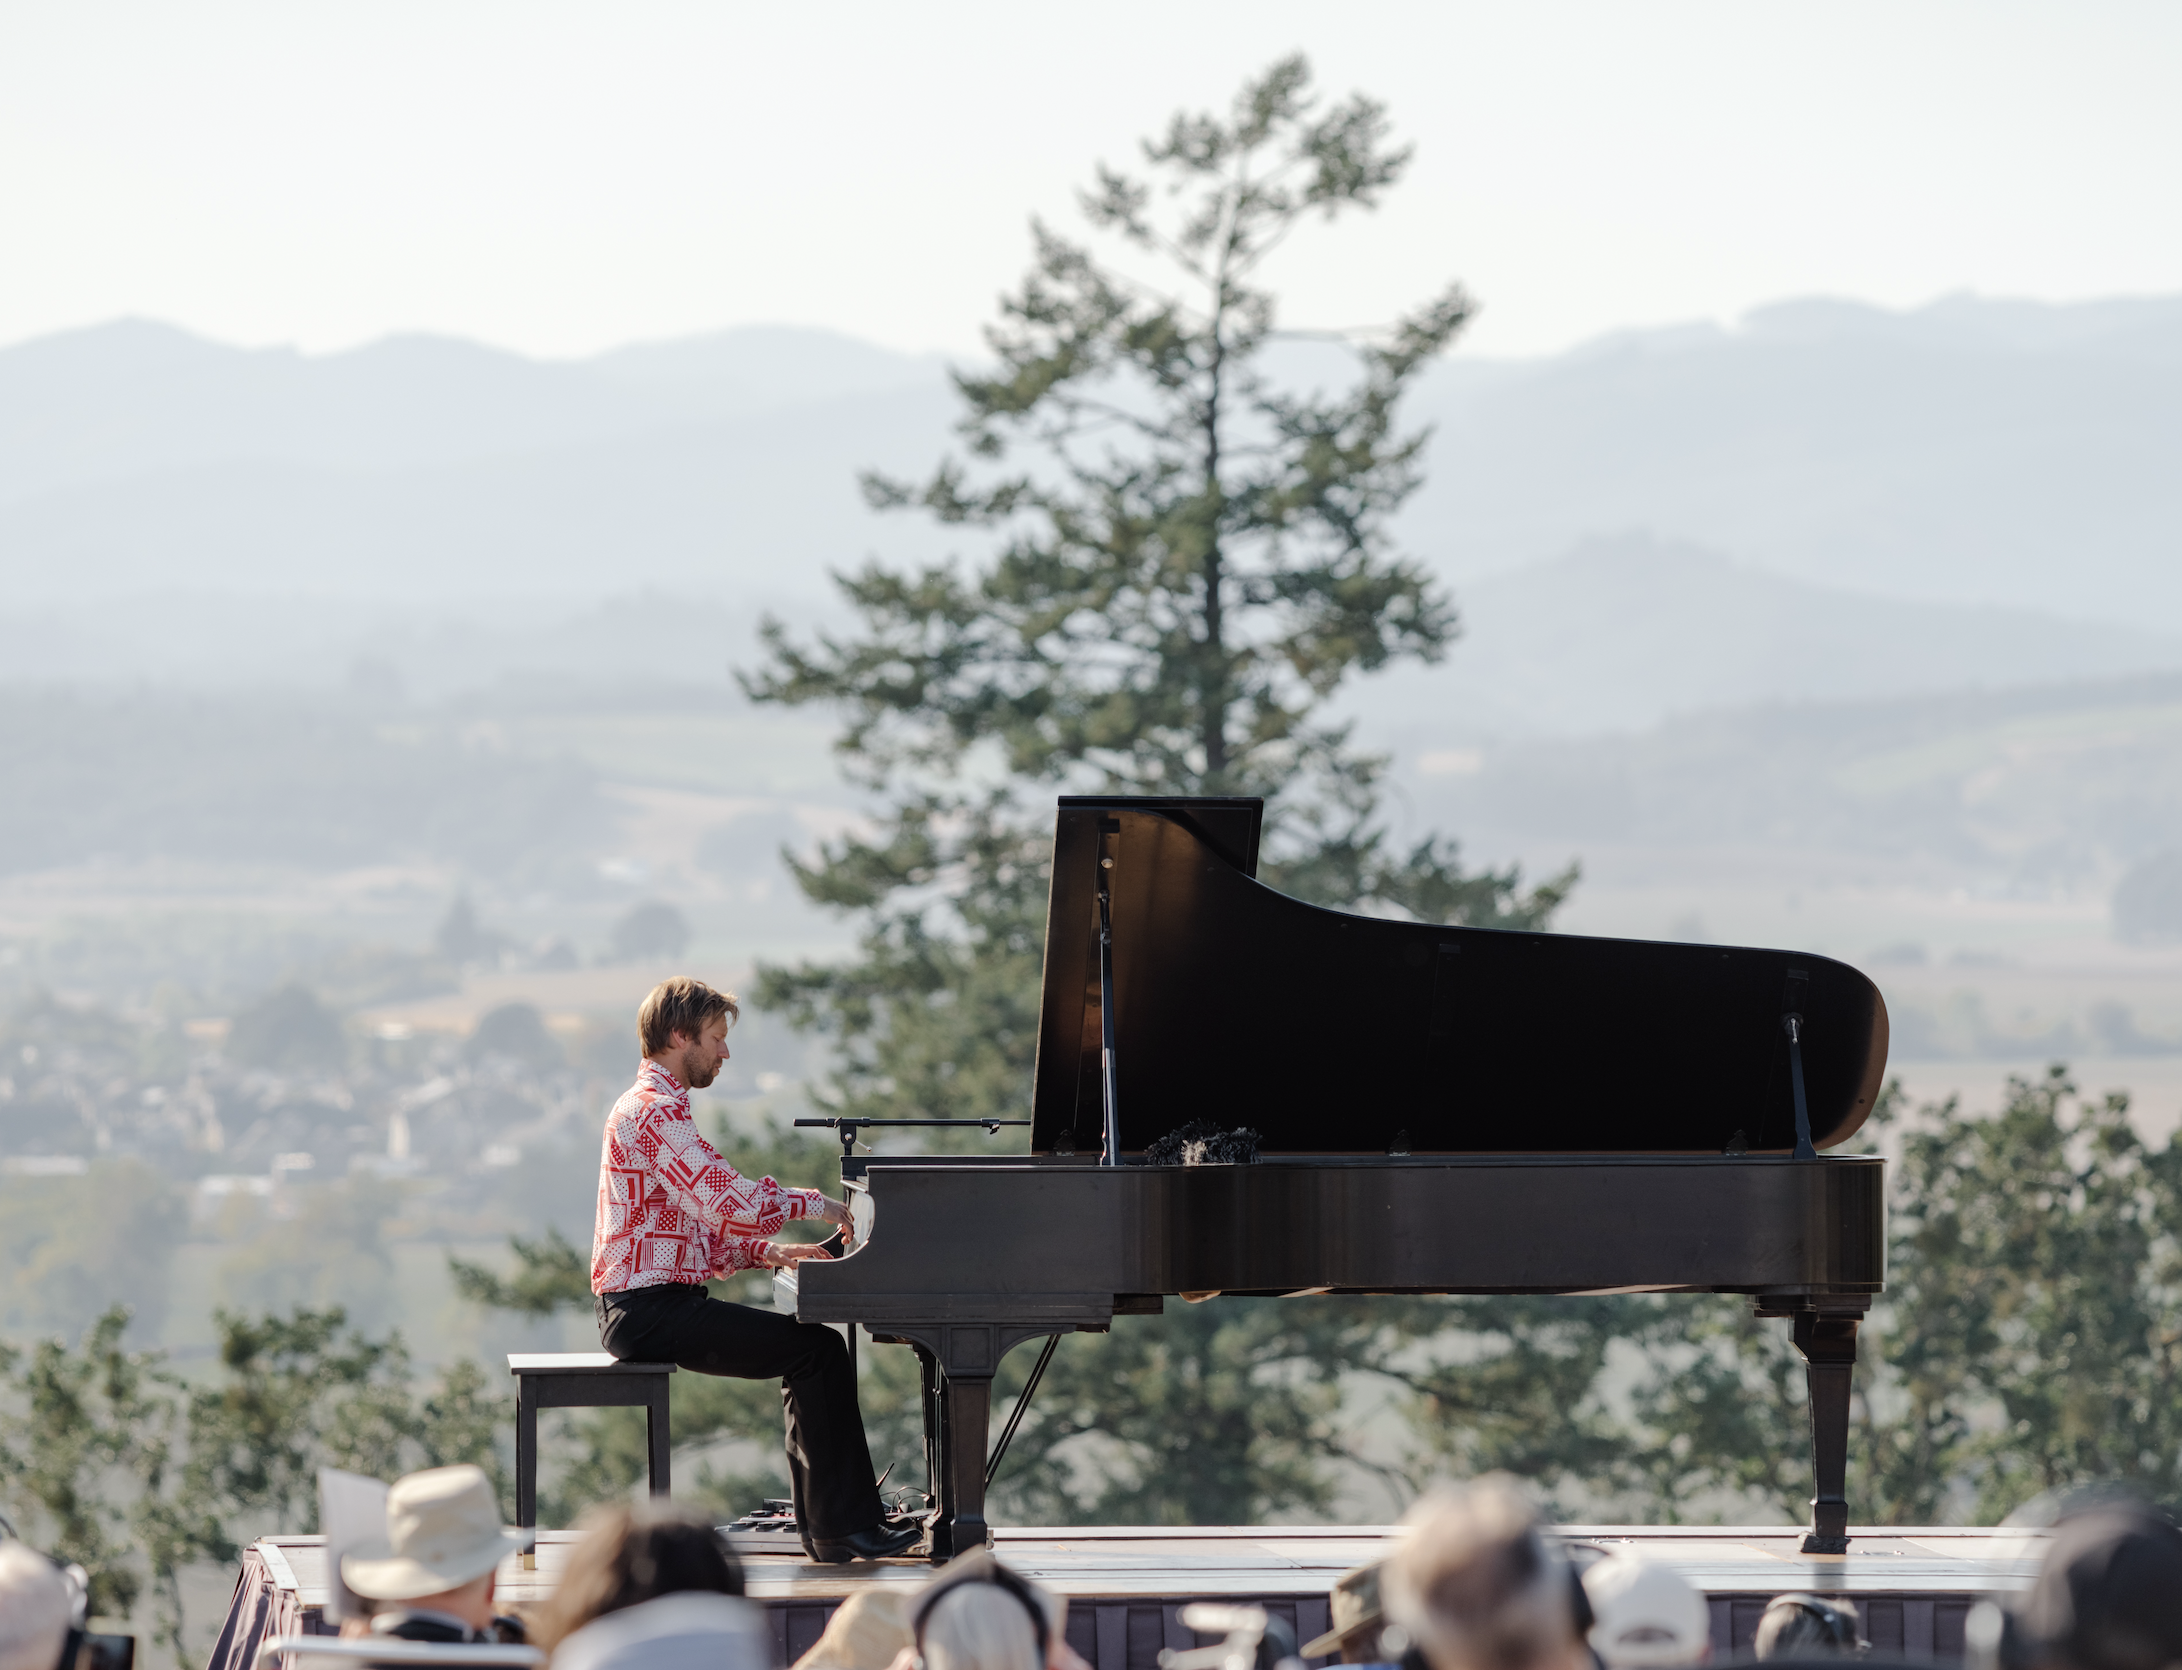 ‘IN A LANDSCAPE’ CONCERT COMING  TO APPLEGATE LAKE